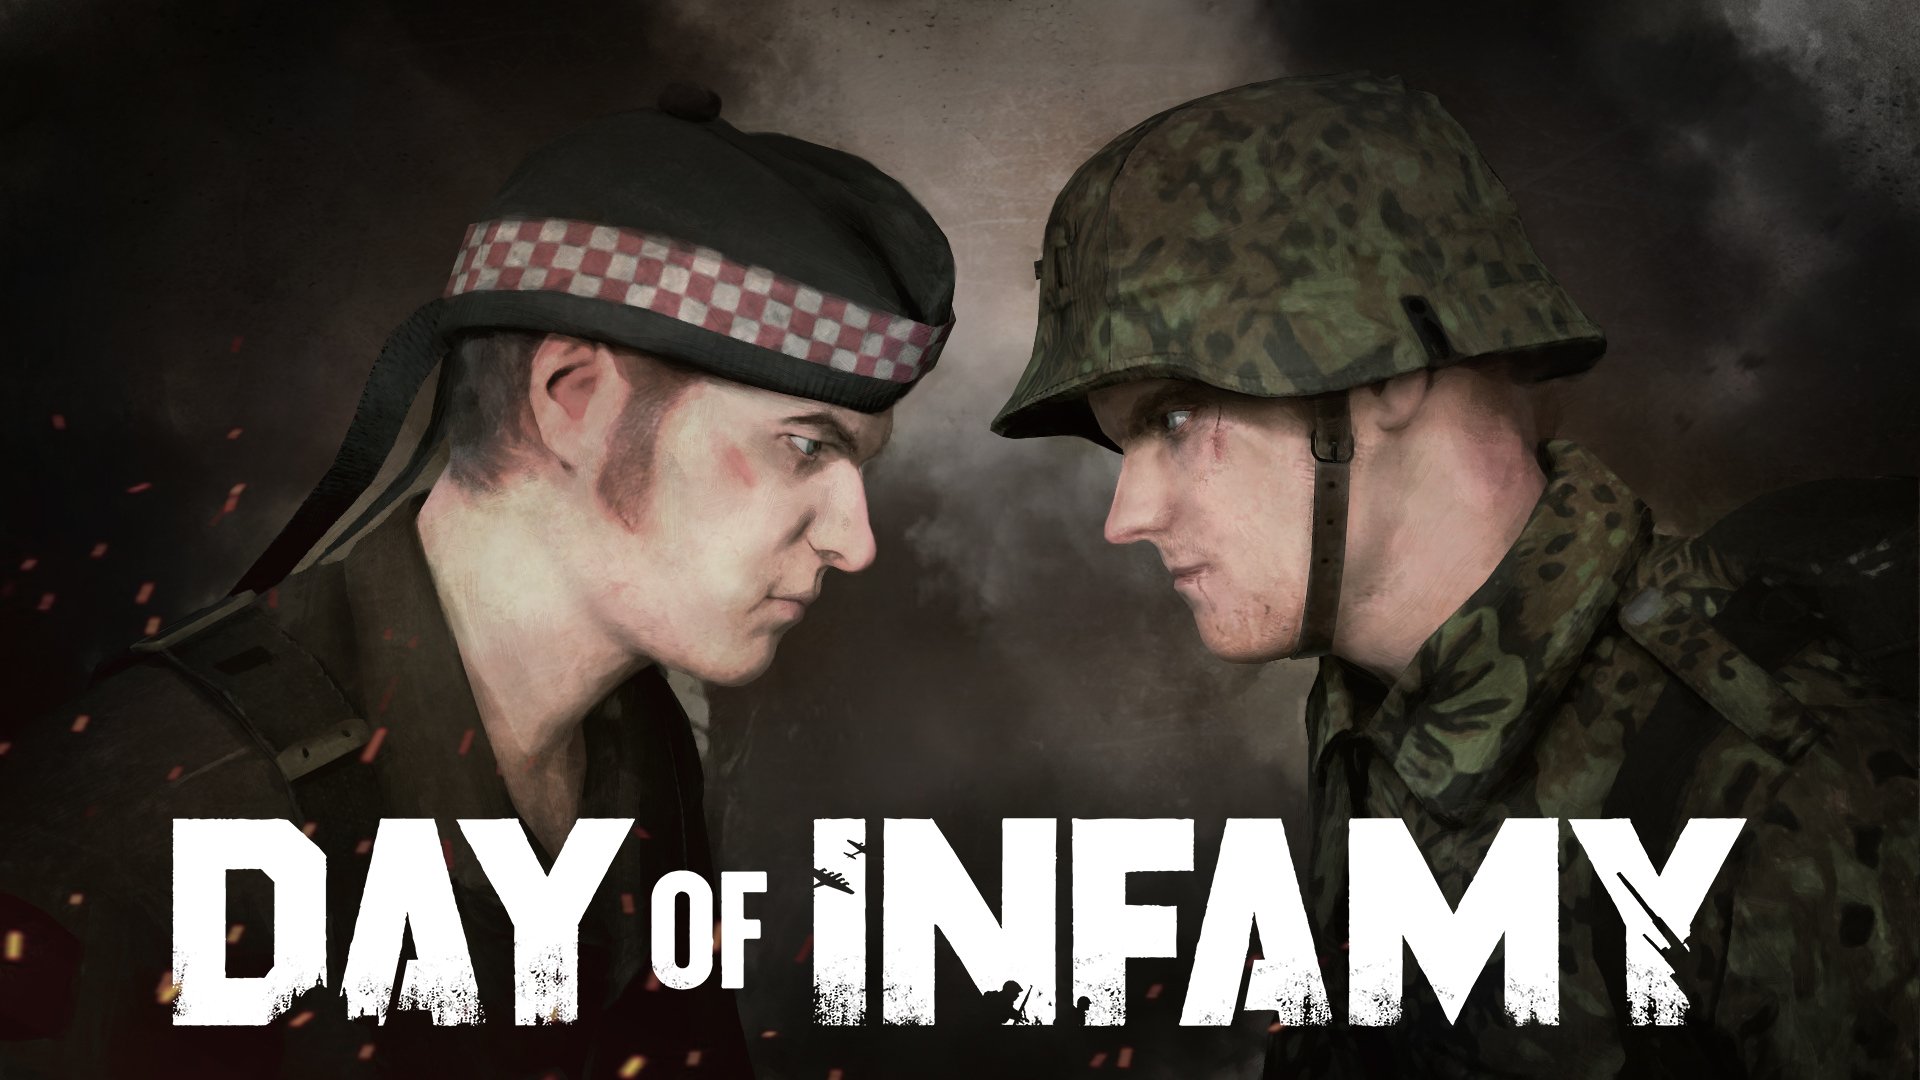 Day of infamy